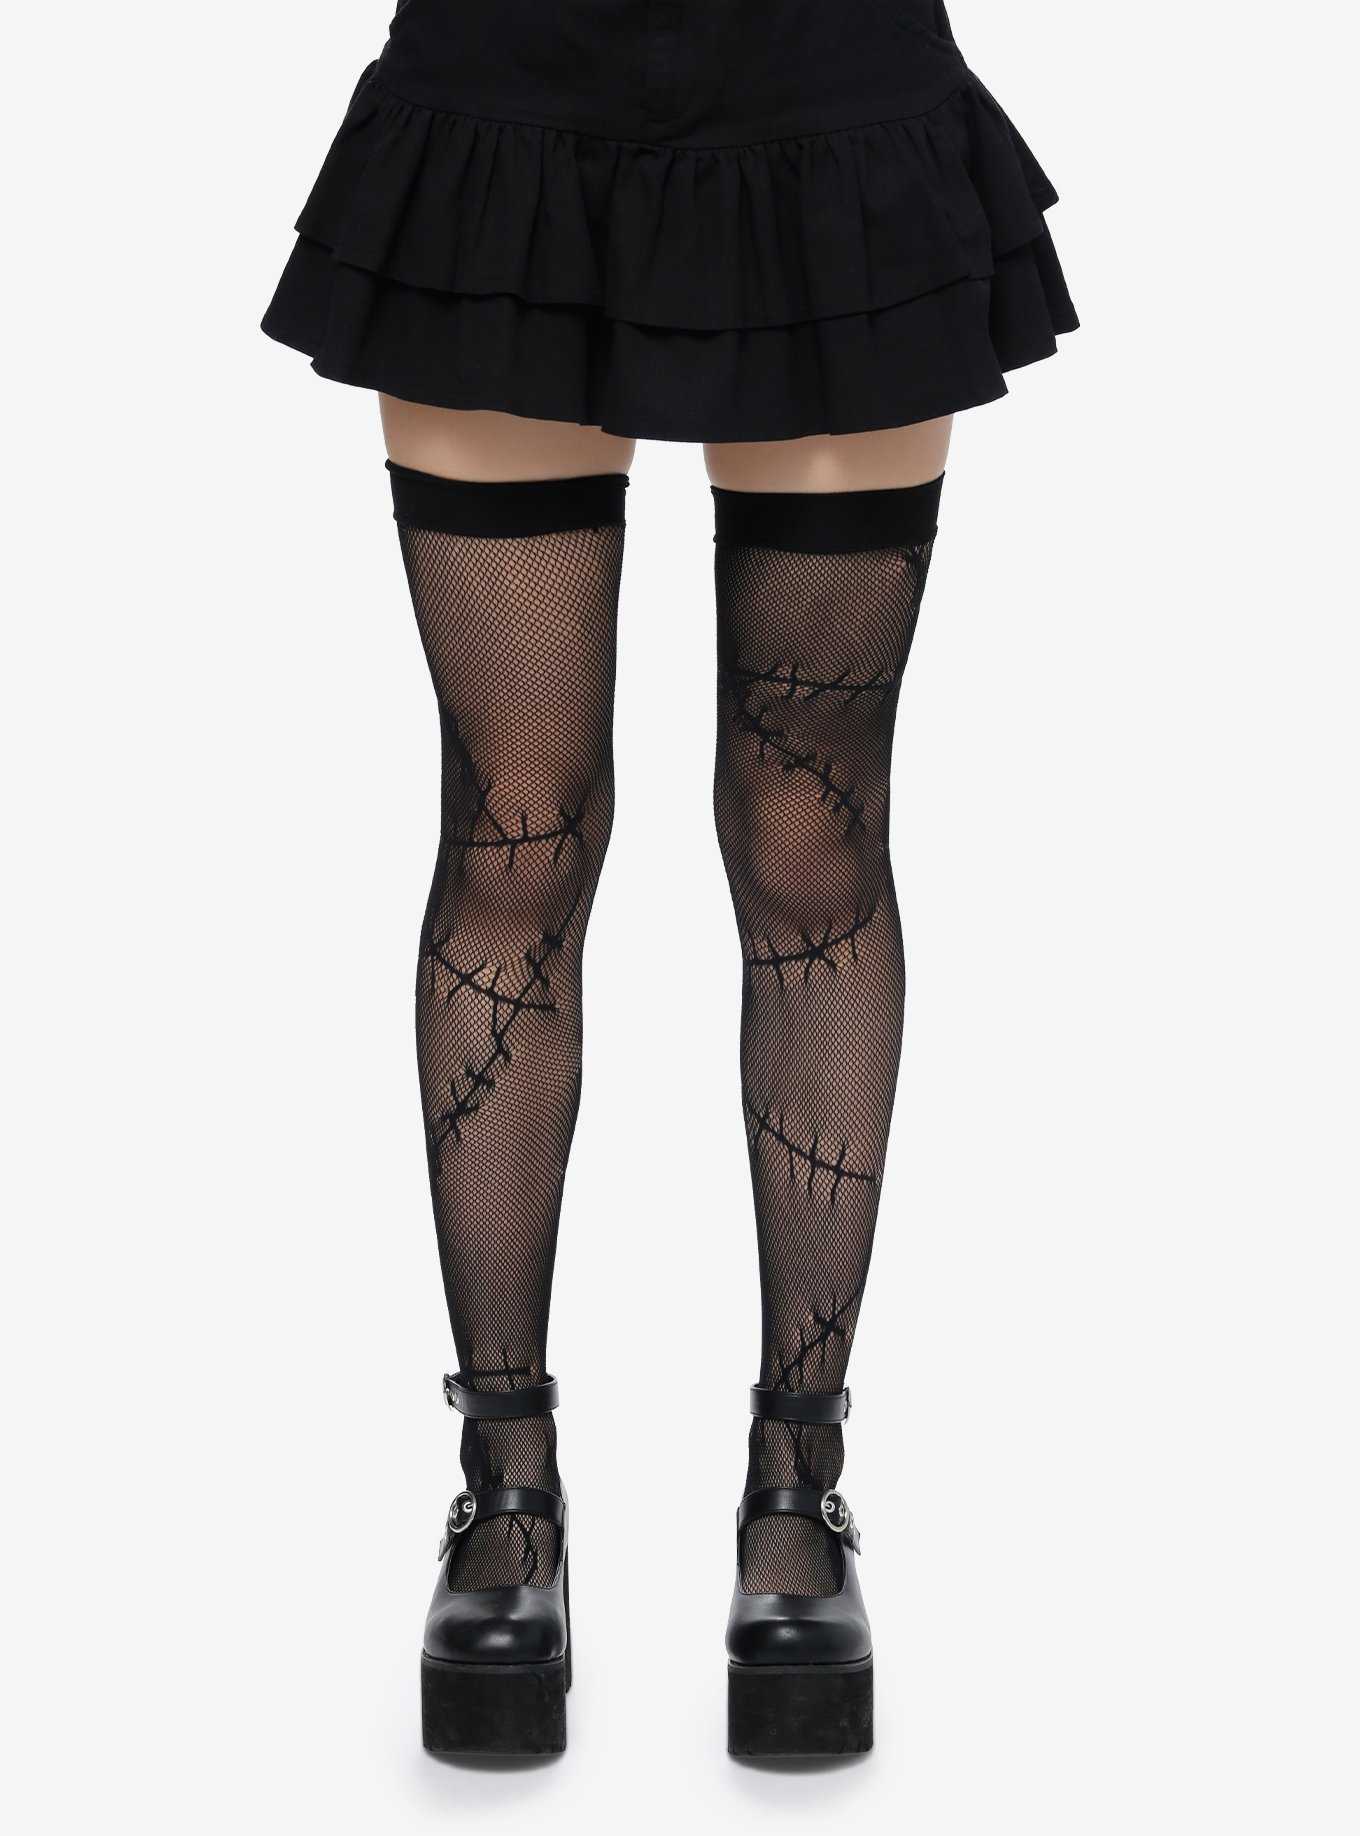 Hooters Tights: Maybe The Weirdest, Most FLATTERING Halloween Tip EVER?